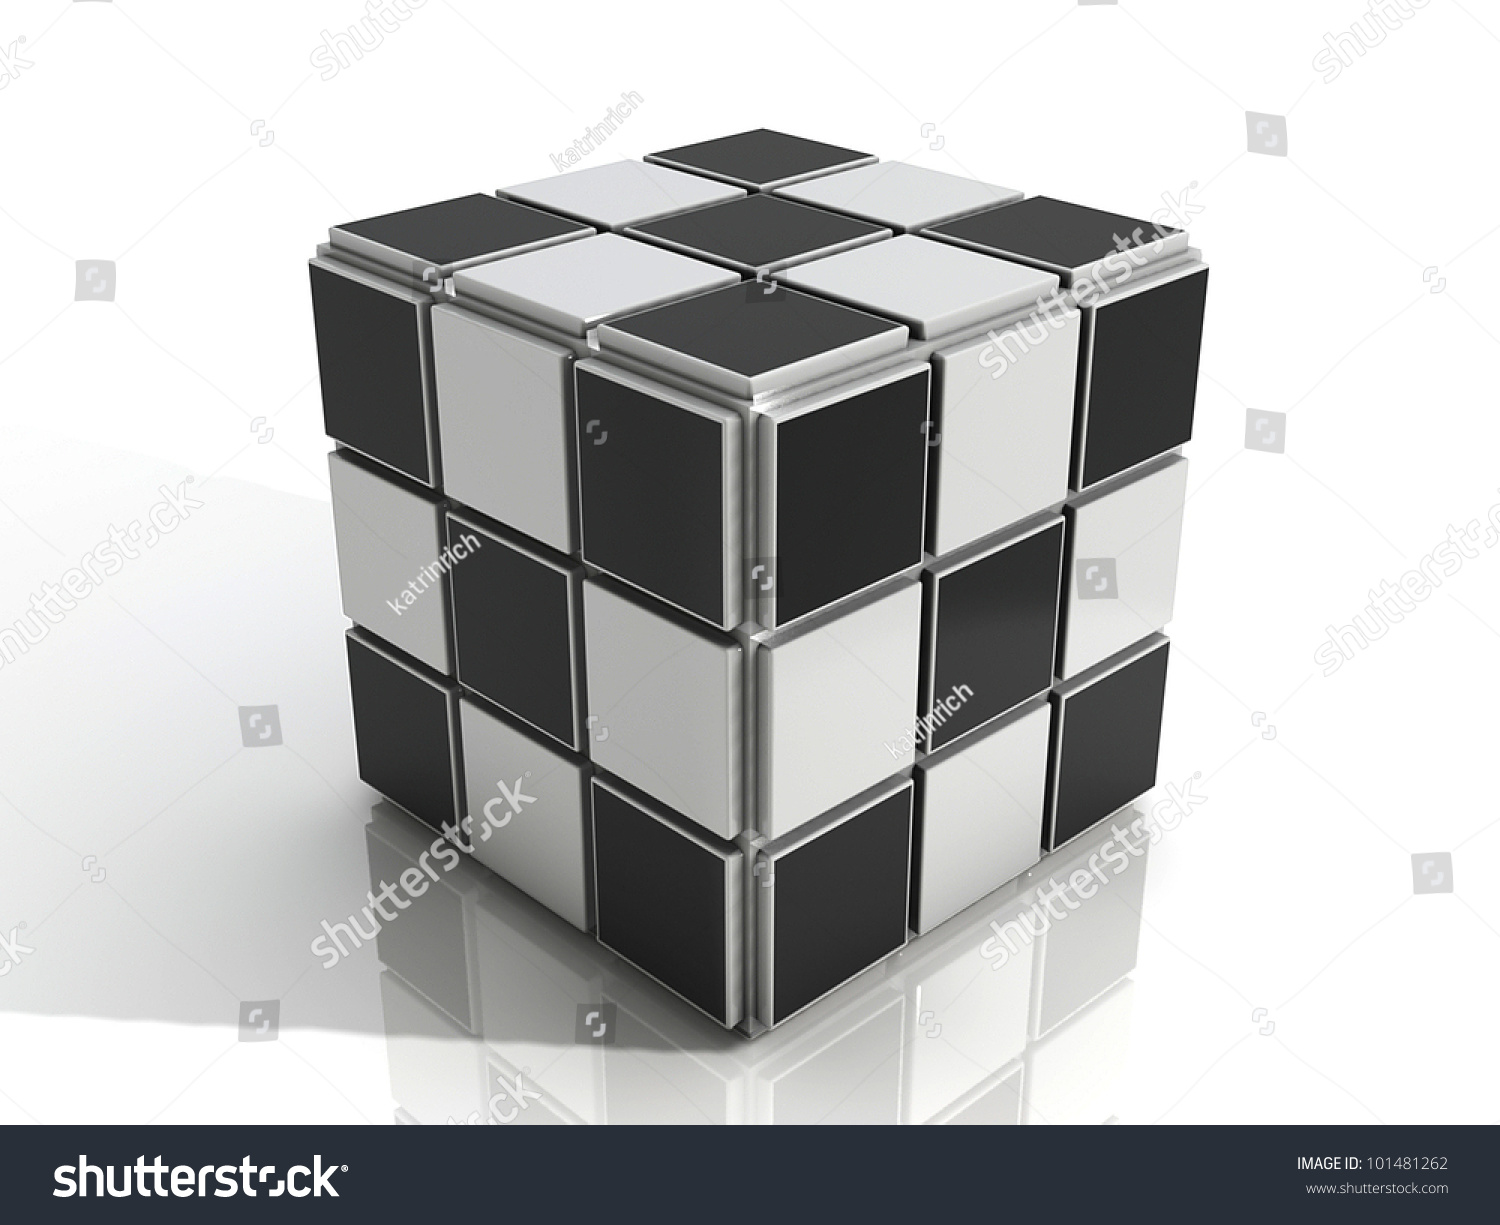 Cube Black And White Stock Photo 101481262 : Shutterstock